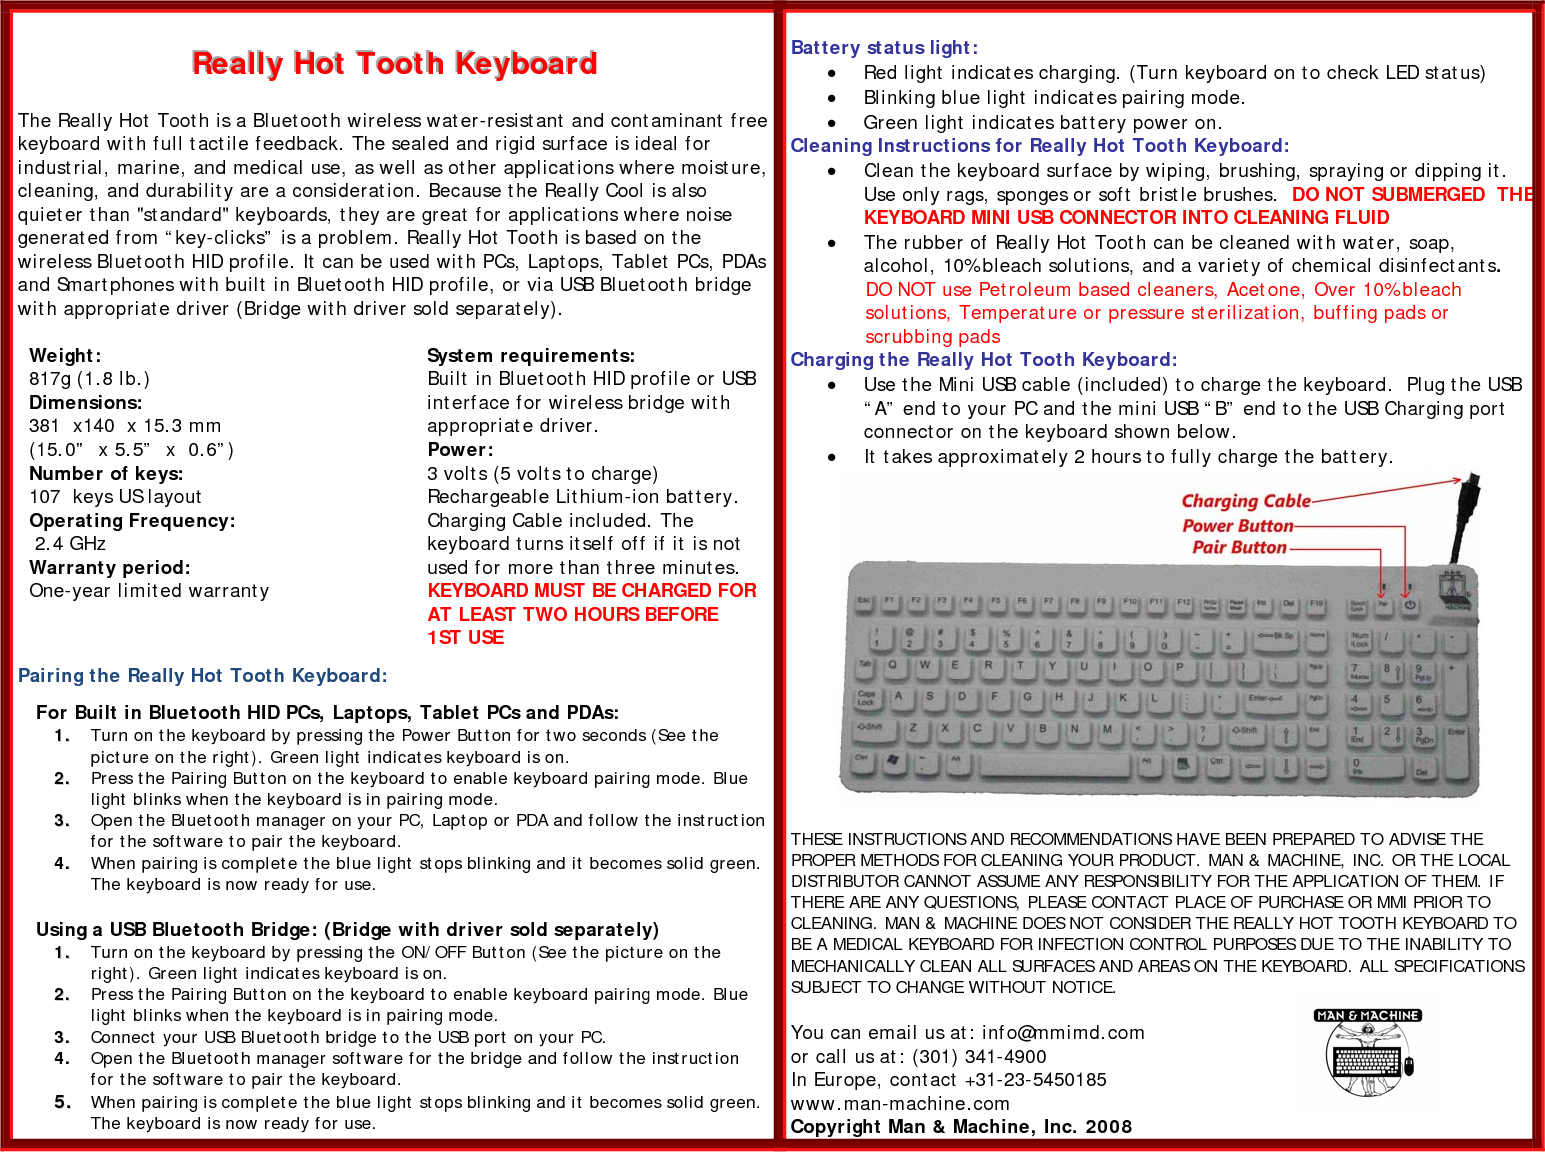 RRReeeaaallllllyyy   HHHooottt   TTToooooottthhh   KKKeeeyyybbboooaaarrrddd    The Really Hot Tooth is a Bluetooth wireless water-resistant and contaminant free keyboard with full tactile feedback. The sealed and rigid surface is ideal for industrial, marine, and medical use, as well as other applications where moisture, cleaning, and durability are a consideration. Because the Really Cool is also quieter than &quot;standard&quot; keyboards, they are great for applications where noise generated from “key-clicks” is a problem. Really Hot Tooth is based on the wireless Bluetooth HID profile. It can be used with PCs, Laptops, Tablet PCs, PDAs and Smartphones with built in Bluetooth HID profile, or via USB Bluetooth bridge with appropriate driver (Bridge with driver sold separately).   Weight: 817g (1.8 lb.) Dimensions: 381  x140  x 15.3 mm  (15.0”  x 5.5”  x  0.6”) Number of keys: 107  keys US layout  Operating Frequency:  2.4 GHz  Warranty period: One-year limited warranty   System requirements: Built in Bluetooth HID profile or USB interface for wireless bridge with appropriate driver. Power: 3 volts (5 volts to charge) Rechargeable Lithium-ion battery. Charging Cable included. The keyboard turns itself off if it is not used for more than three minutes. KEYBOARD MUST BE CHARGED FOR AT LEAST TWO HOURS BEFORE 1ST USE  Pairing the Really Hot Tooth Keyboard:      For Built in Bluetooth HID PCs, Laptops, Tablet PCs and PDAs: 11..  Turn on the keyboard by pressing the Power Button for two seconds (See the picture on the right). Green light indicates keyboard is on. 22..  Press the Pairing Button on the keyboard to enable keyboard pairing mode. Blue light blinks when the keyboard is in pairing mode.  33..  Open the Bluetooth manager on your PC, Laptop or PDA and follow the instruction for the software to pair the keyboard.  44..  When pairing is complete the blue light stops blinking and it becomes solid green. The keyboard is now ready for use.      Using a USB Bluetooth Bridge: (Bridge with driver sold separately) 11..  Turn on the keyboard by pressing the ON/OFF Button (See the picture on the right). Green light indicates keyboard is on. 22..  Press the Pairing Button on the keyboard to enable keyboard pairing mode. Blue light blinks when the keyboard is in pairing mode. 33..  Connect your USB Bluetooth bridge to the USB port on your PC. 44..  Open the Bluetooth manager software for the bridge and follow the instruction for the software to pair the keyboard.   55..  When pairing is complete the blue light stops blinking and it becomes solid green. The keyboard is now ready for use.  Battery status light: • Red light indicates charging. (Turn keyboard on to check LED status) • Blinking blue light indicates pairing mode. • Green light indicates battery power on.  Cleaning Instructions for Really Hot Tooth Keyboard: • Clean the keyboard surface by wiping, brushing, spraying or dipping it. Use only rags, sponges or soft bristle brushes.  DO NOT SUBMERGED  THEKEYBOARD MINI USB CONNECTOR INTO CLEANING FLUID   • The rubber of Really Hot Tooth can be cleaned with water, soap, alcohol, 10% bleach solutions, and a variety of chemical disinfectants.  DO NOT use Petroleum based cleaners, Acetone, Over 10% bleach solutions, Temperature or pressure sterilization, buffing pads or  scrubbing pads Charging the Really Hot Tooth Keyboard: • Use the Mini USB cable (included) to charge the keyboard.  Plug the USB “A” end to your PC and the mini USB “B” end to the USB Charging port connector on the keyboard shown below. • It takes approximately 2 hours to fully charge the battery.   THESE INSTRUCTIONS AND RECOMMENDATIONS HAVE BEEN PREPARED TO ADVISE THE PROPER METHODS FOR CLEANING YOUR PRODUCT. MAN &amp; MACHINE, INC. OR THE LOCAL DISTRIBUTOR CANNOT ASSUME ANY RESPONSIBILITY FOR THE APPLICATION OF THEM. IF THERE ARE ANY QUESTIONS, PLEASE CONTACT PLACE OF PURCHASE OR MMI PRIOR TO CLEANING. MAN &amp; MACHINE DOES NOT CONSIDER THE REALLY HOT TOOTH KEYBOARD TO BE A MEDICAL KEYBOARD FOR INFECTION CONTROL PURPOSES DUE TO THE INABILITY TO MECHANICALLY CLEAN ALL SURFACES AND AREAS ON THE KEYBOARD. ALL SPECIFICATIONS SUBJECT TO CHANGE WITHOUT NOTICE.  You can email us at: info@mmimd.com  or call us at: (301) 341-4900 In Europe, contact +31-23-5450185 www.man-machine.com  Copyright Man &amp; Machine, Inc. 2008  